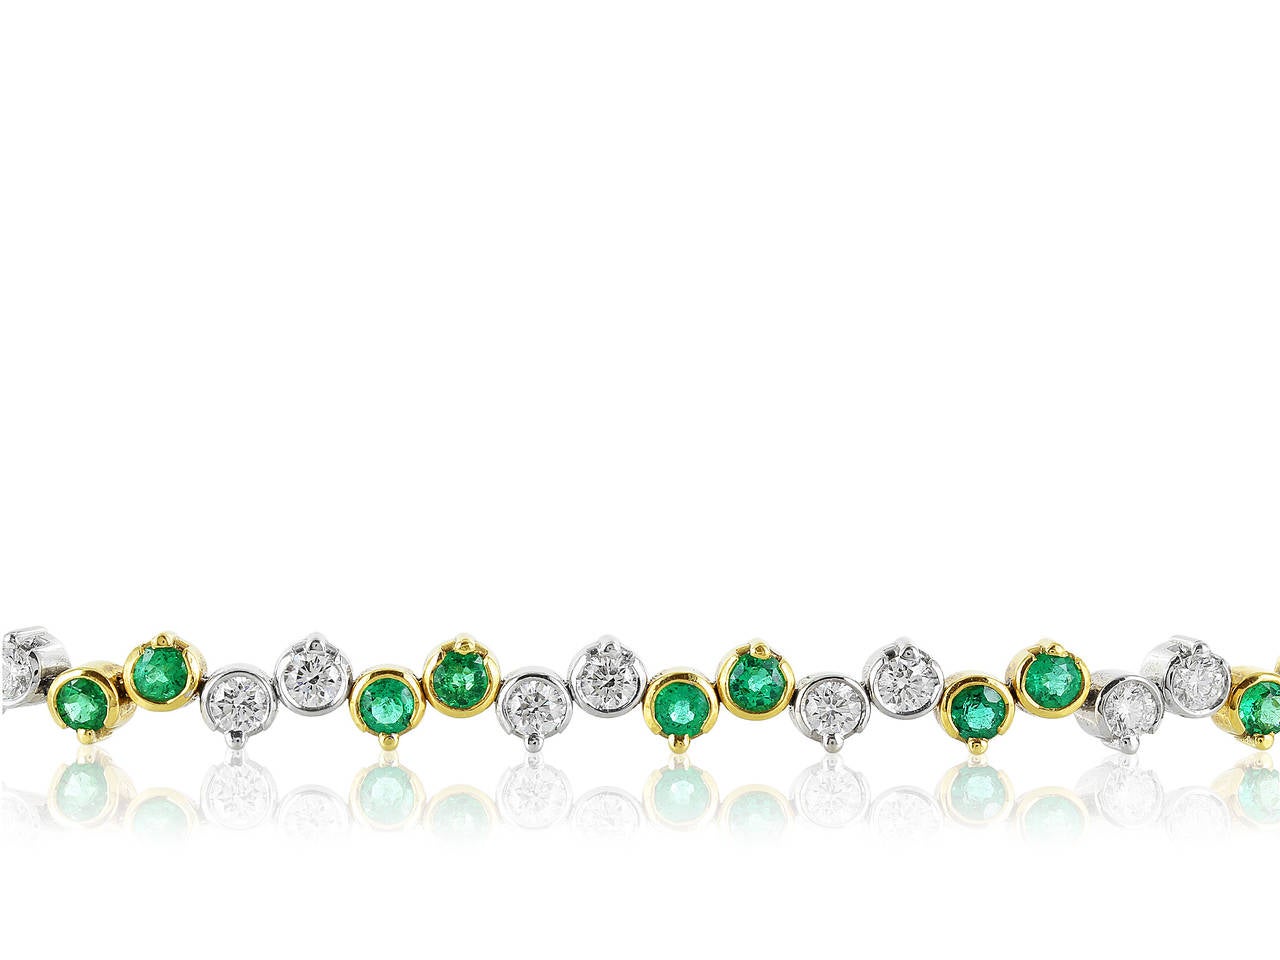 18 karat yellow and white gold emerald and diamond tennis bracelet consisting of round brilliant cut emeralds having a total weight of 2.68 carats and round brilliant cut diamonds having a total weight of 2.48 carats, and an average color and